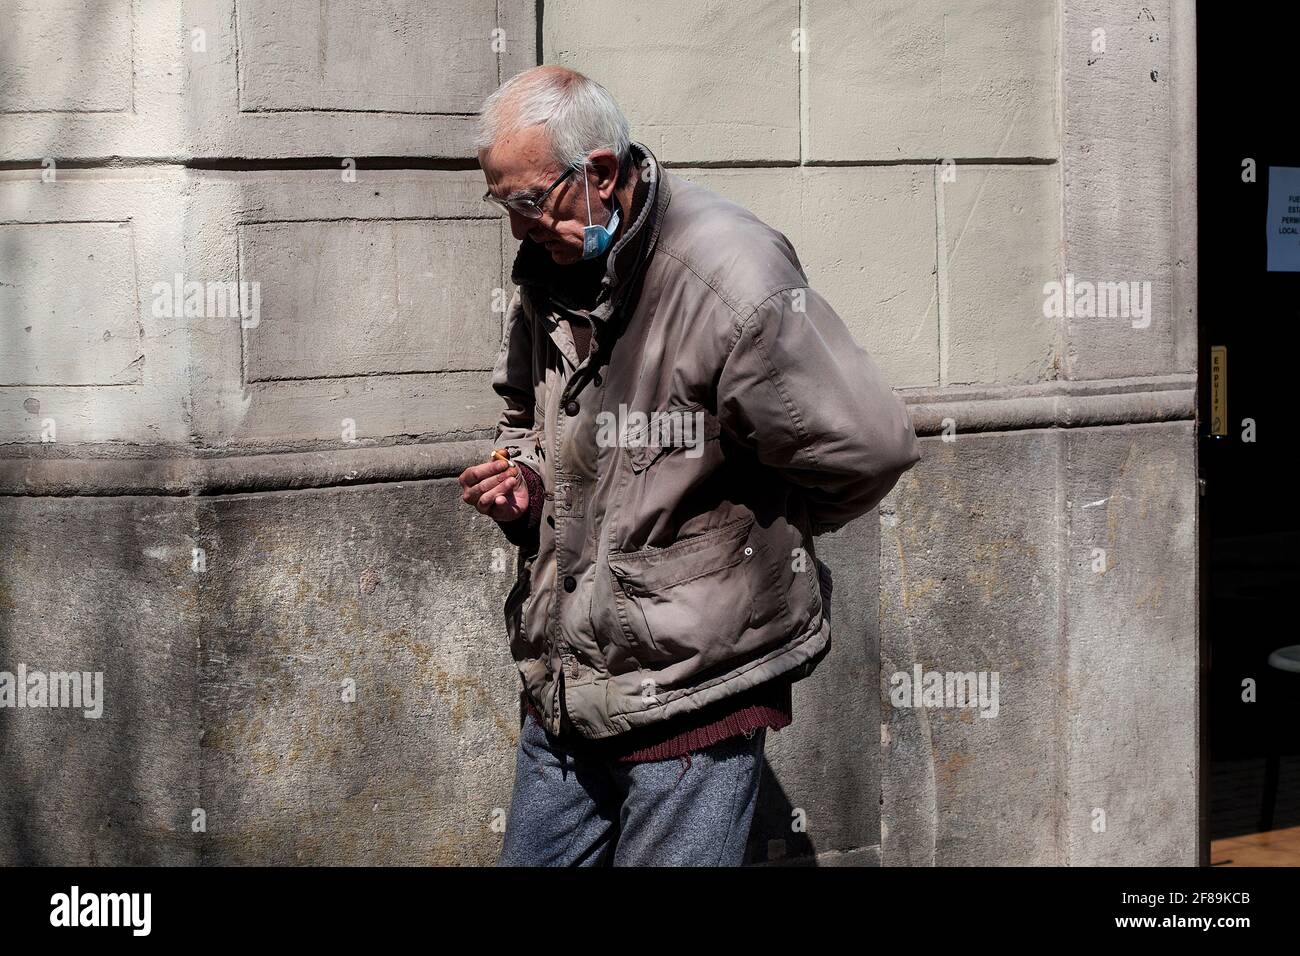 Mentally ill man smoking a cigarette in the street. Stock Photo